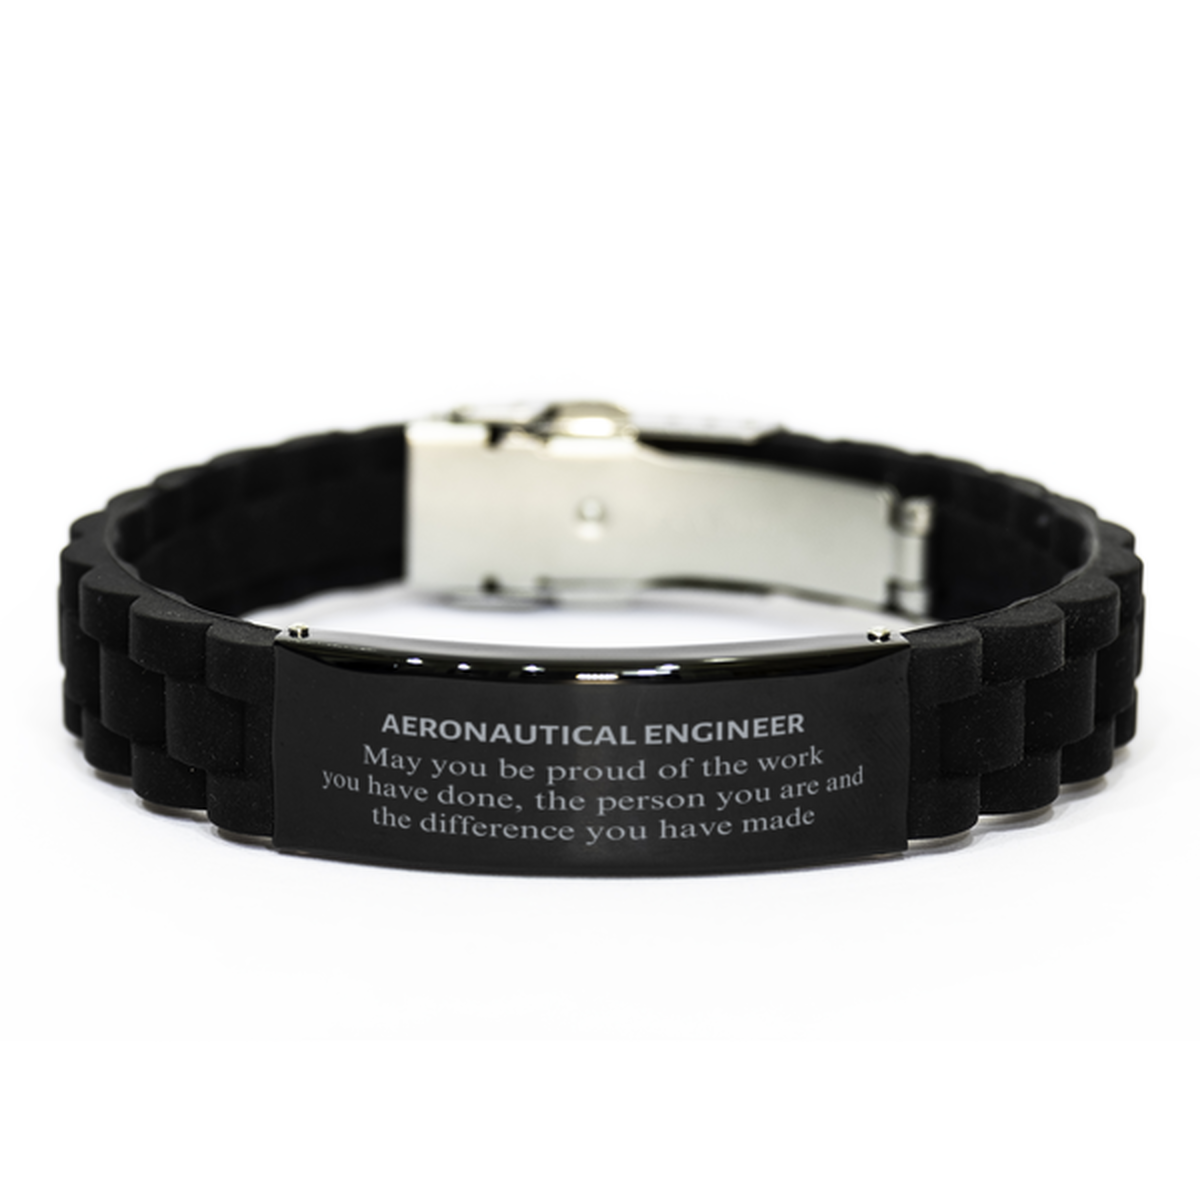 Aeronautical Engineer May you be proud of the work you have done, Retirement Aeronautical Engineer Black Glidelock Clasp Bracelet for Colleague Appreciation Gifts Amazing for Aeronautical Engineer